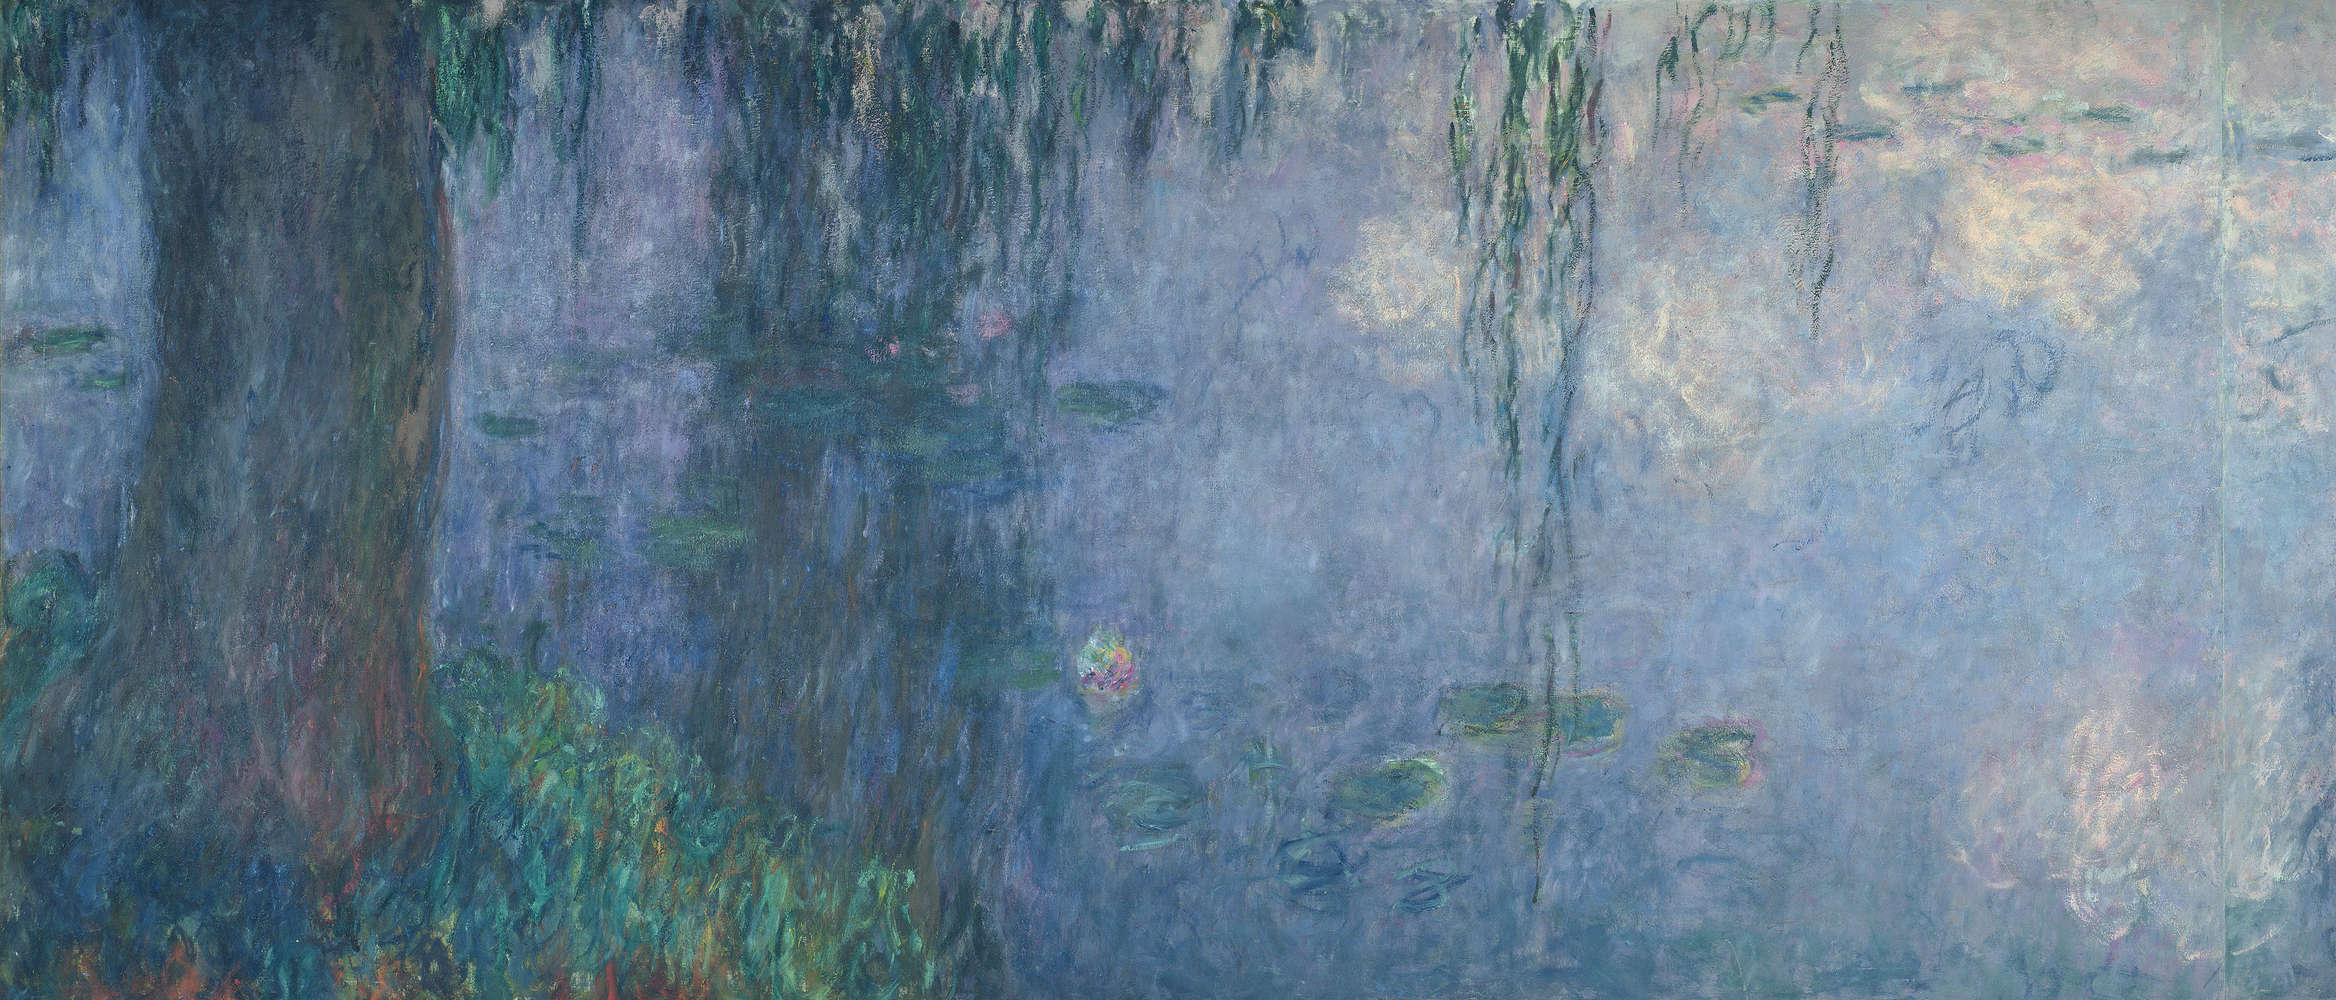             Photo wallpaper "Water lilies: morning with weeping willows" detail by Claude Monet
        